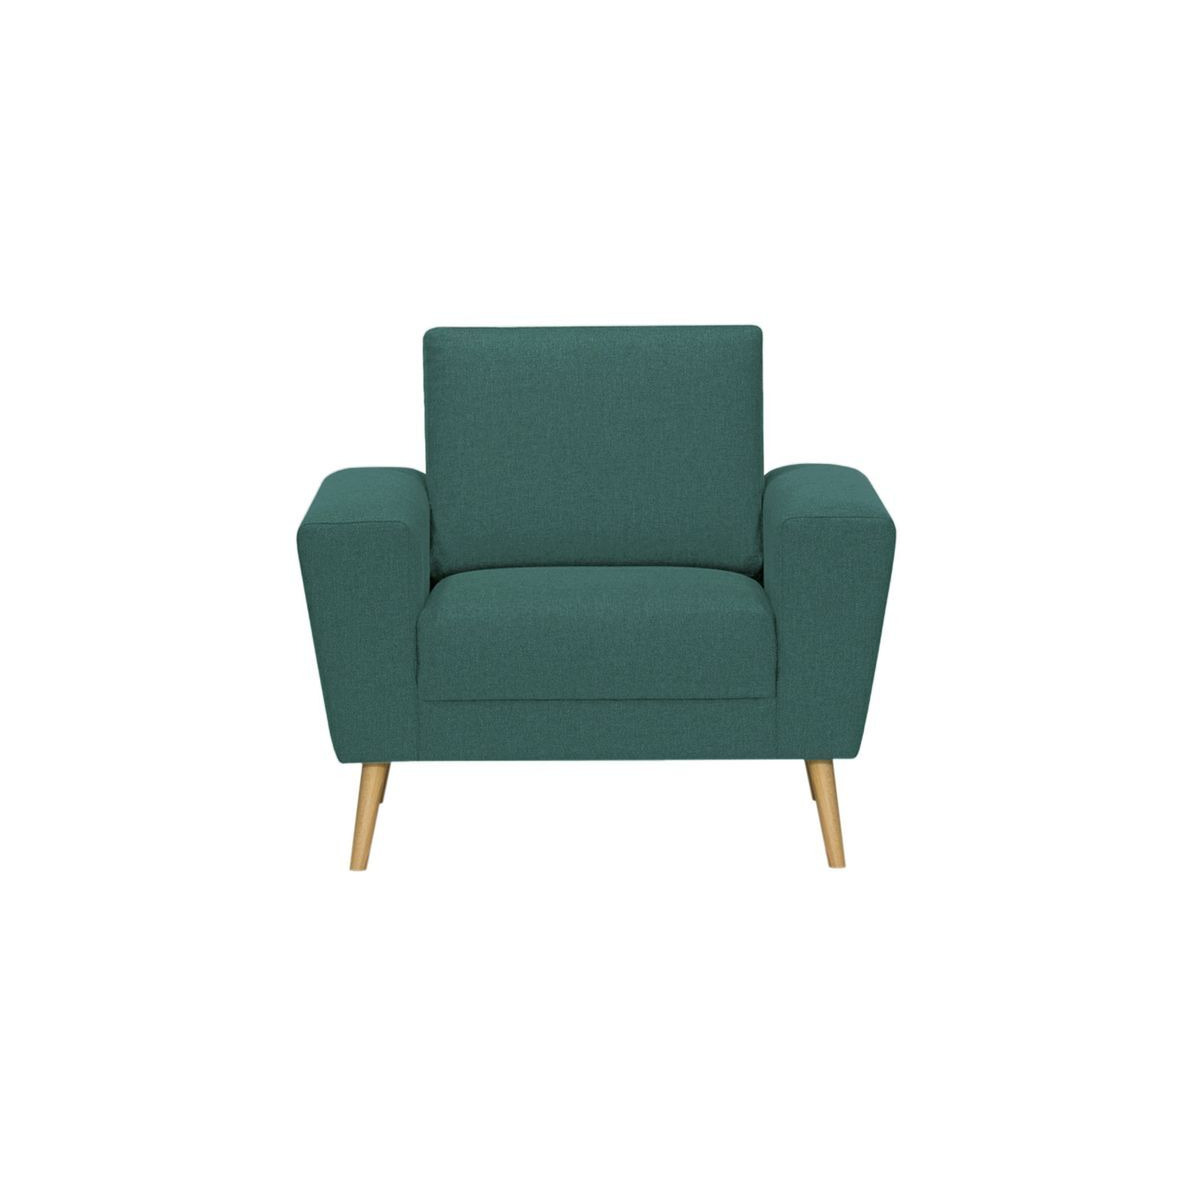 Cosy Armchair, turquoise - image 1